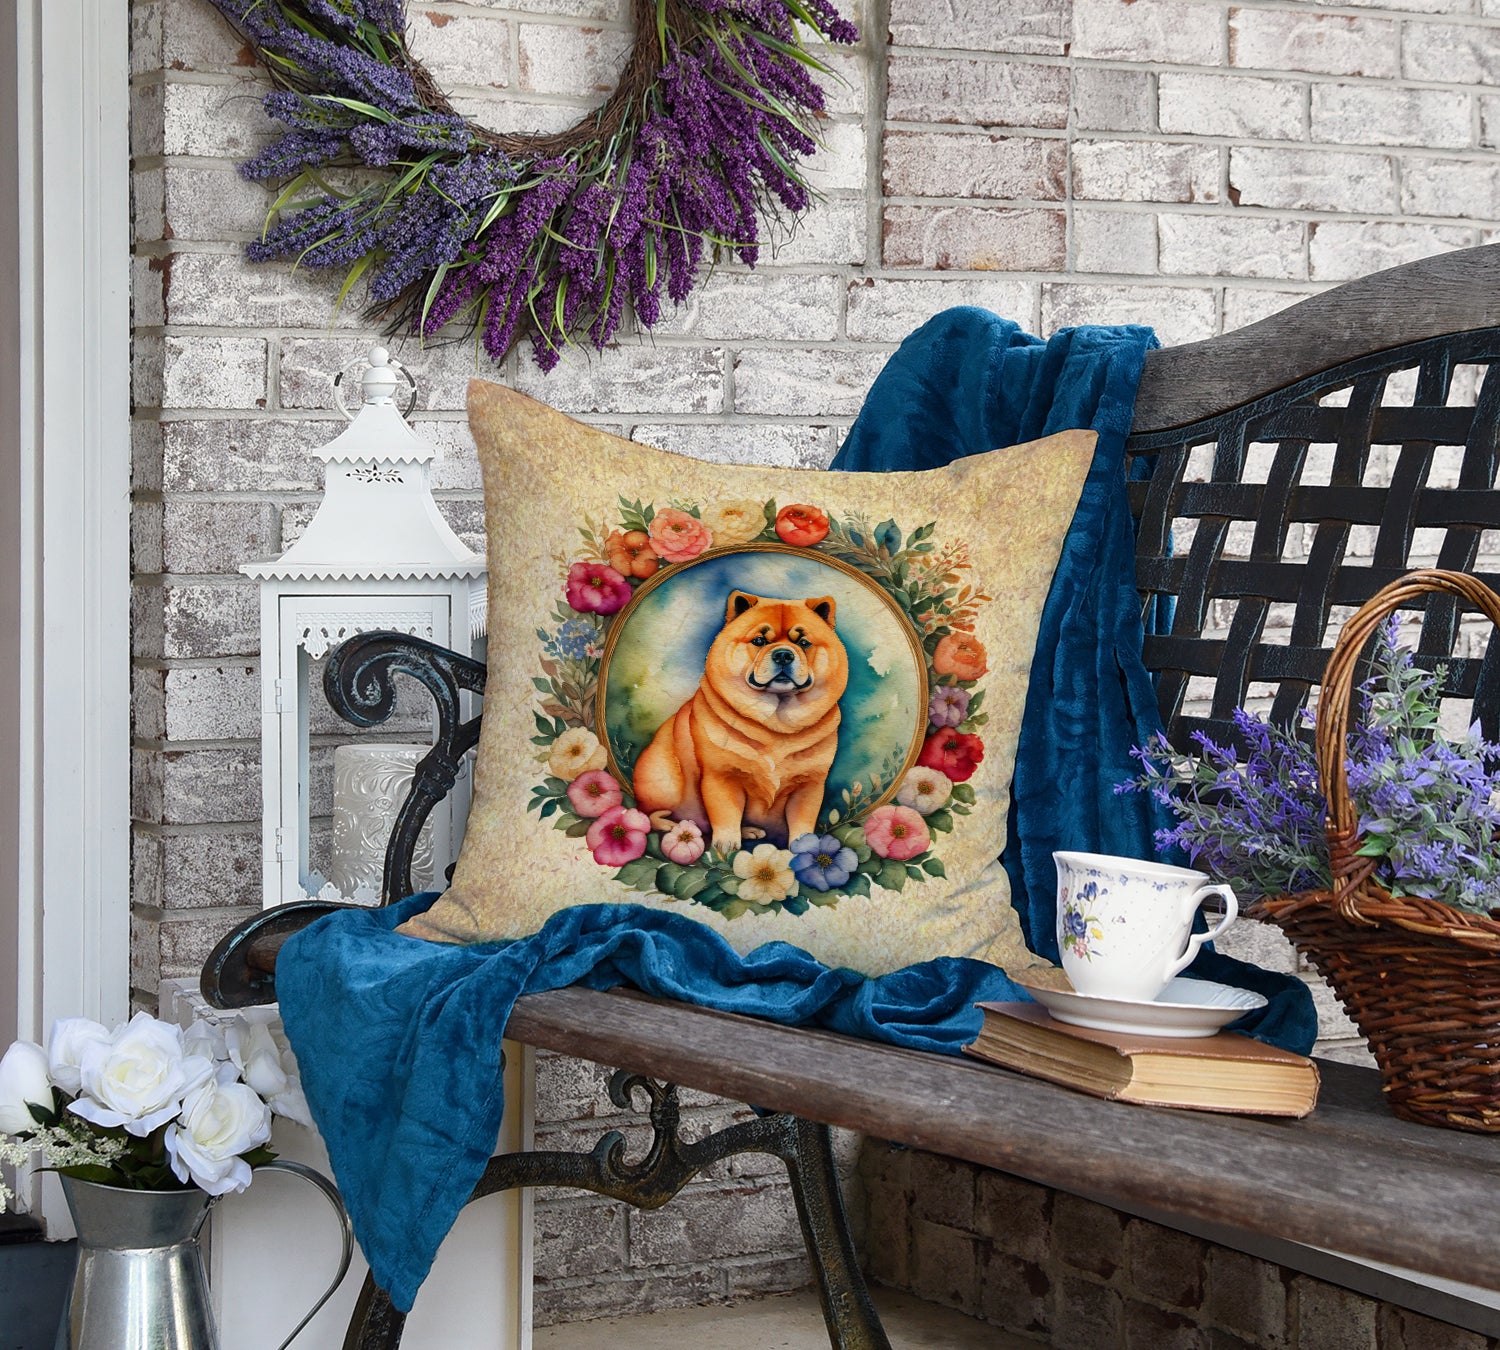 Chow Chow and Flowers Fabric Decorative Pillow